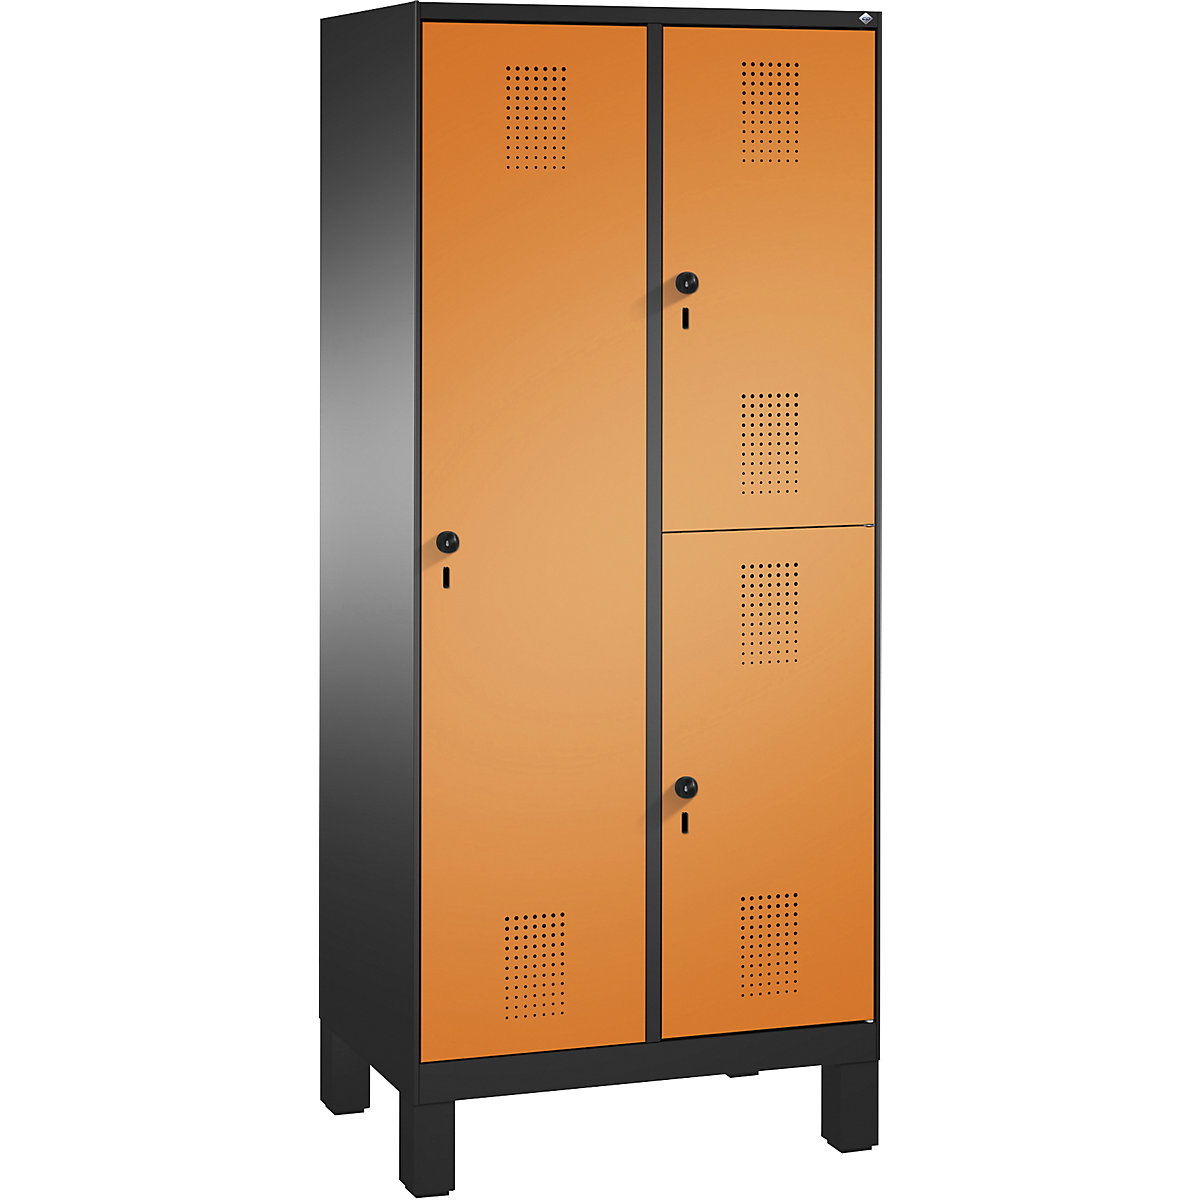 EVOLO combination cupboard, single and double tier – C+P, 2 compartments, 3 doors, compartment width 400 mm, with feet, black grey / yellow orange